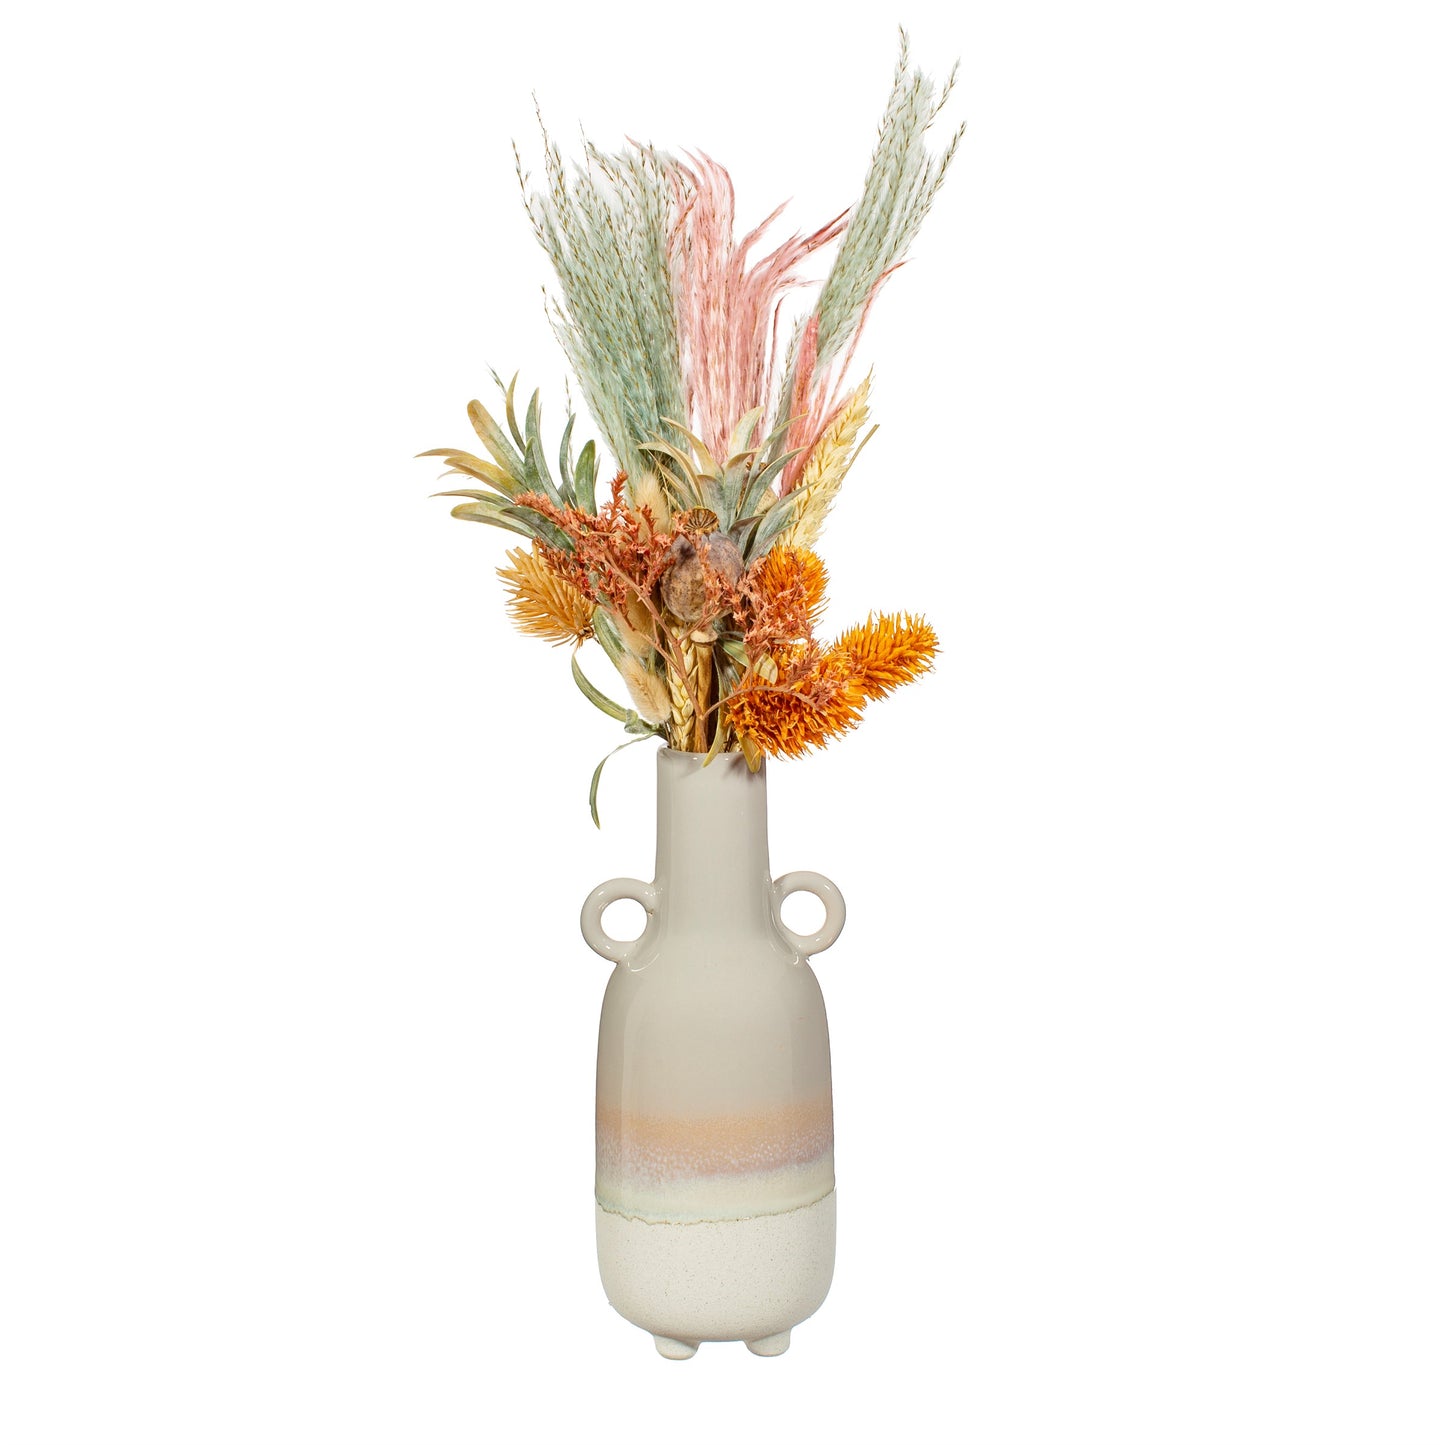 Grey Ombre Vase with dried flowers